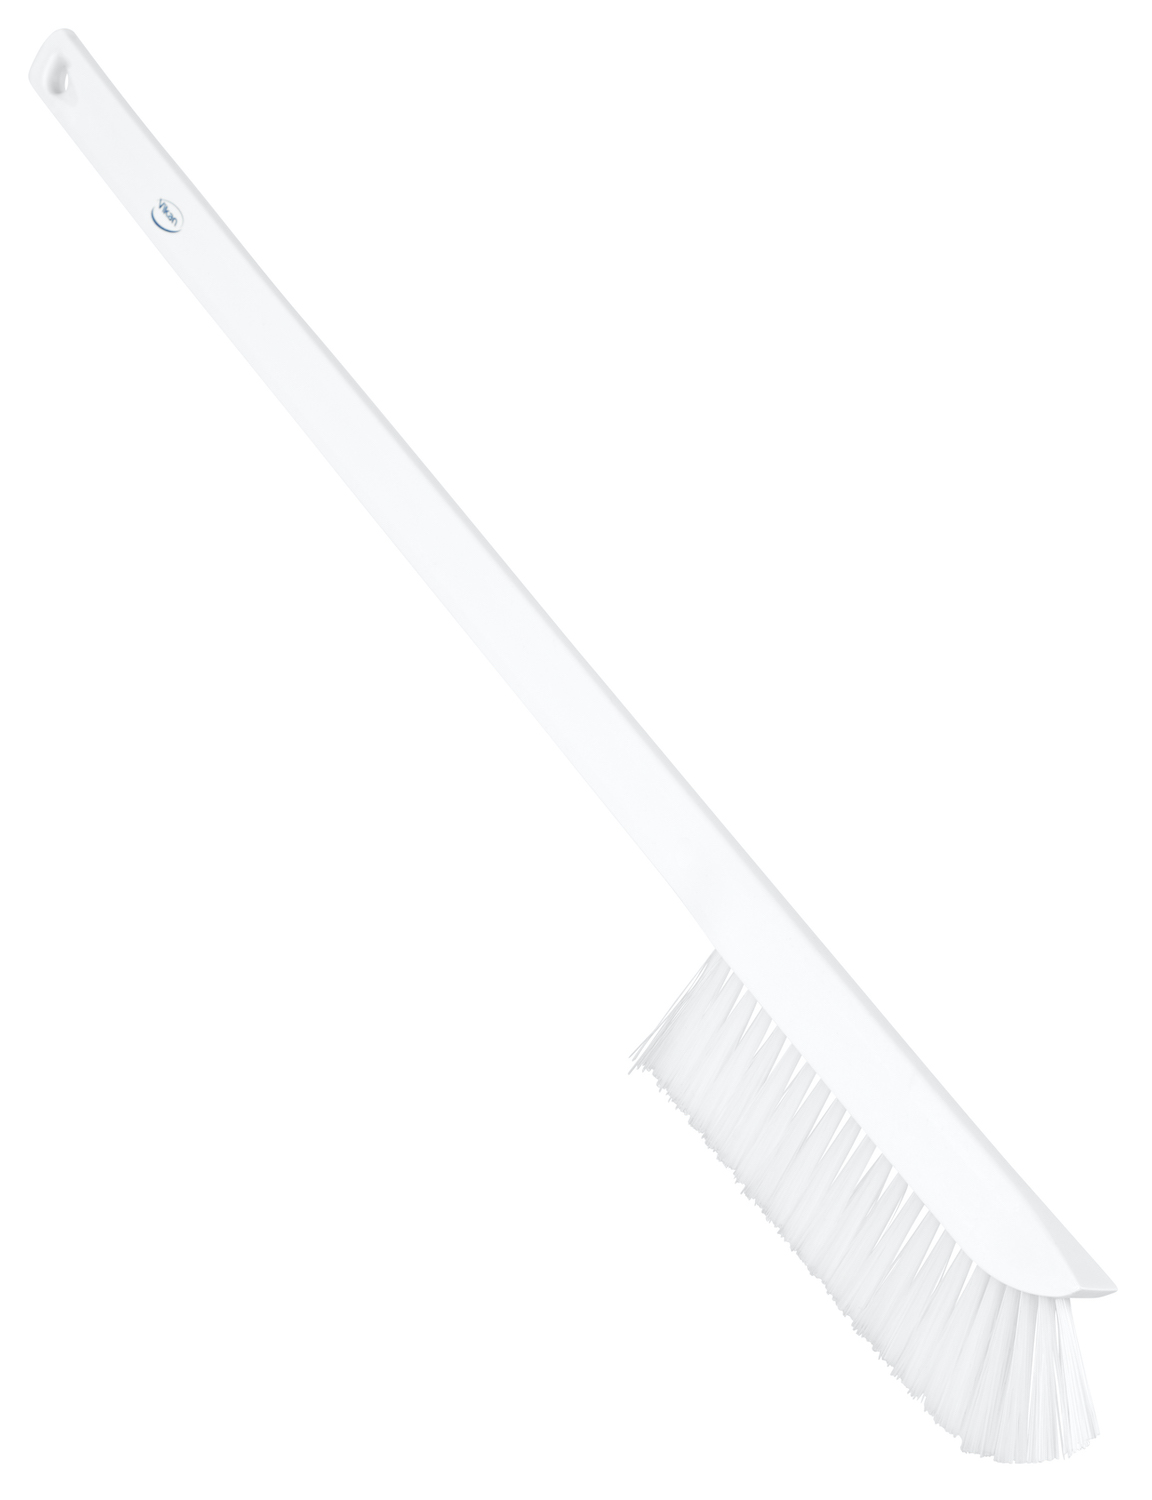 Ultra-Slim Cleaning Brush with Long Handle, 600 mm, Medium, White